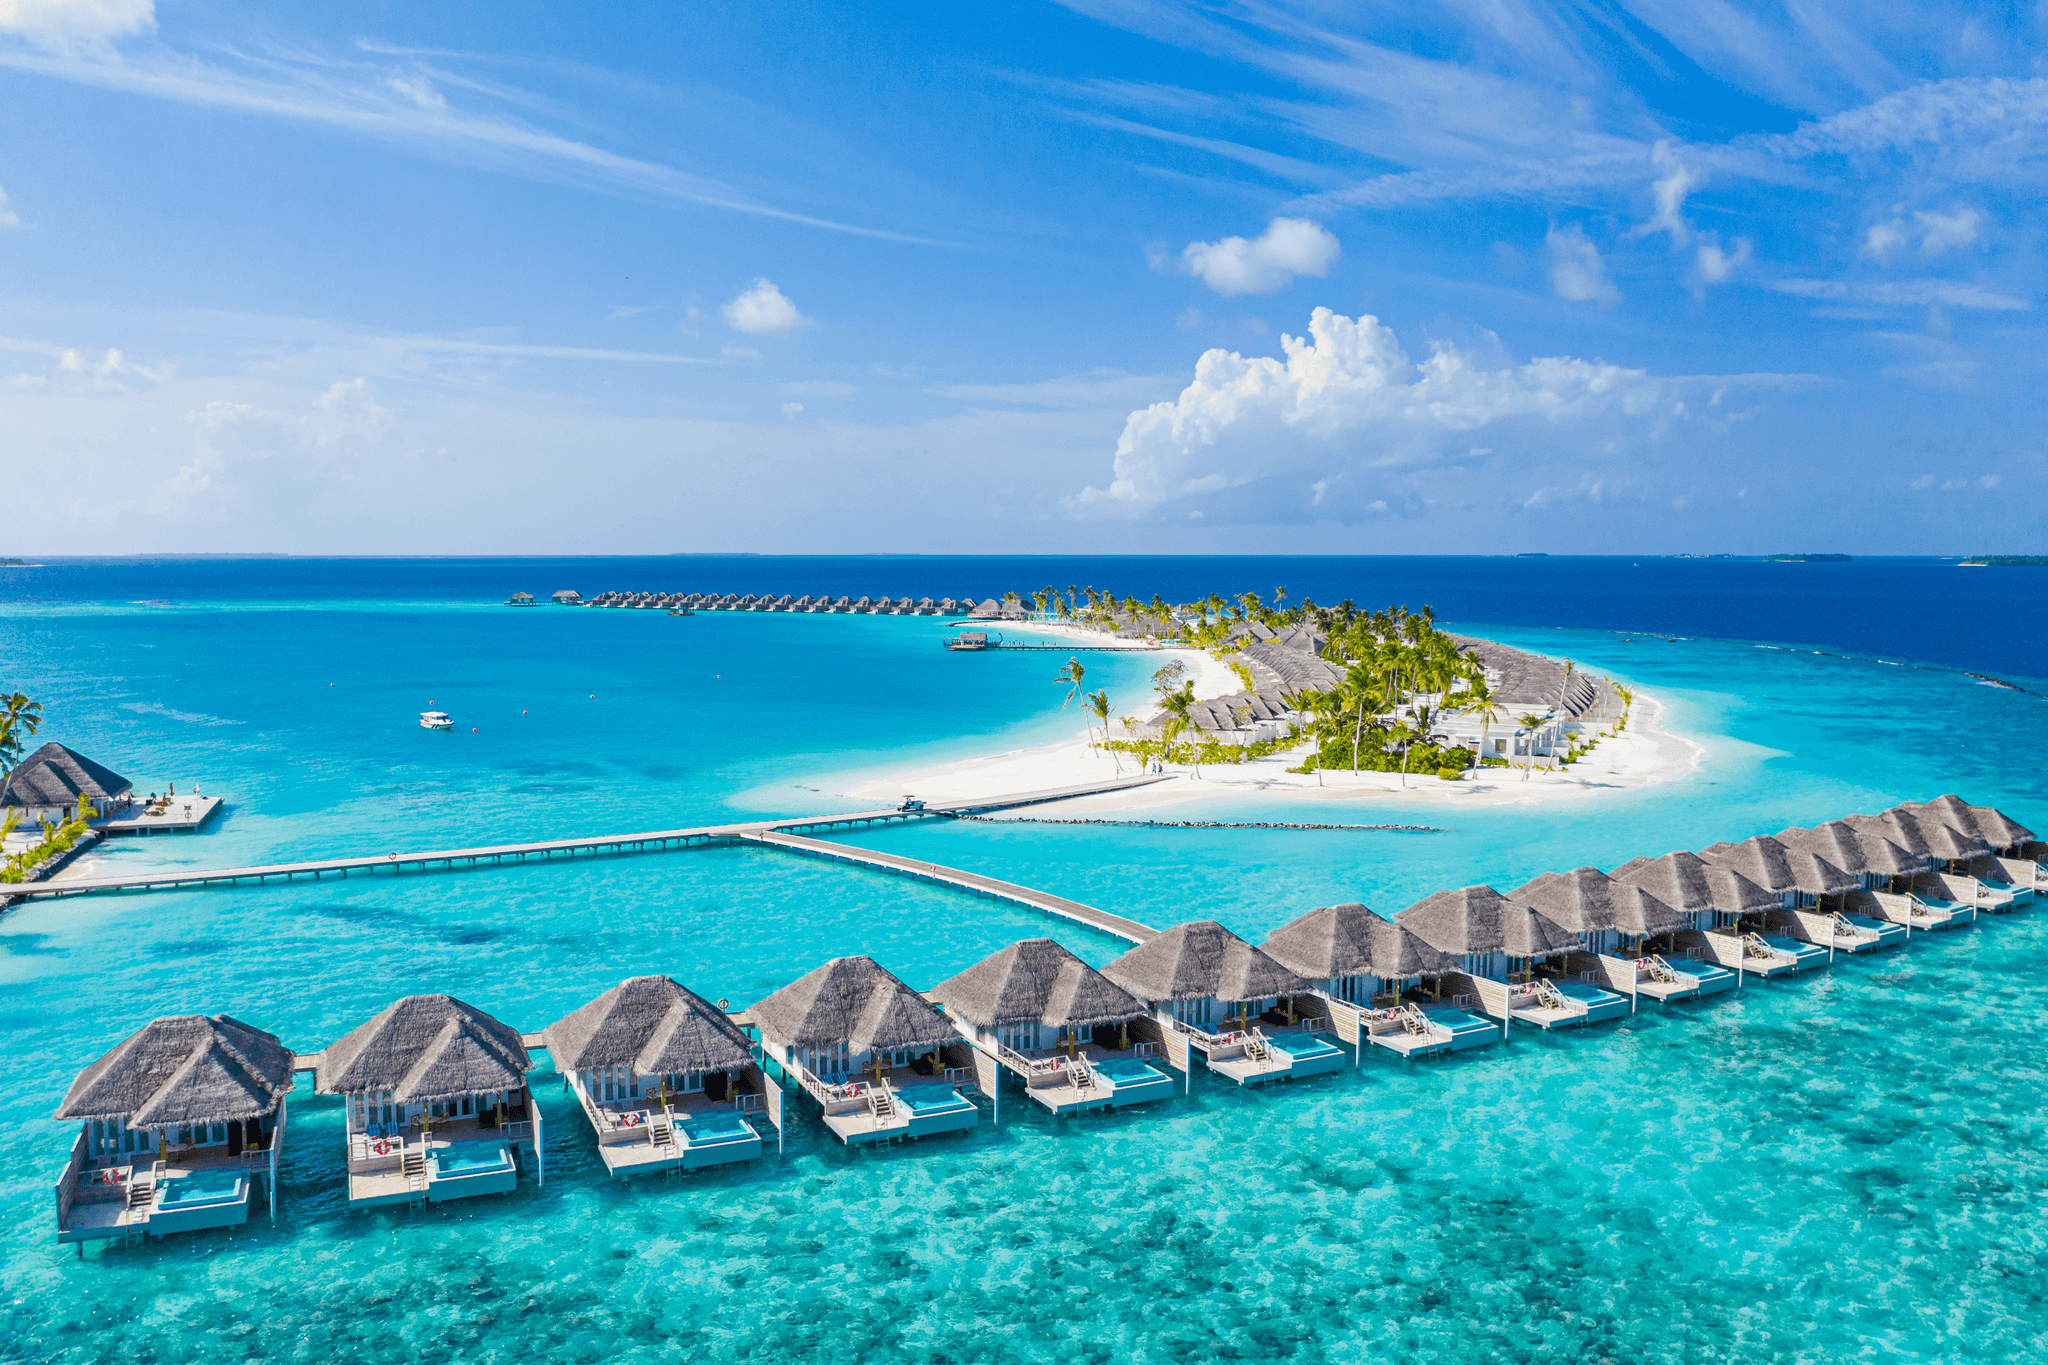 Luxury hotels in the Maldives